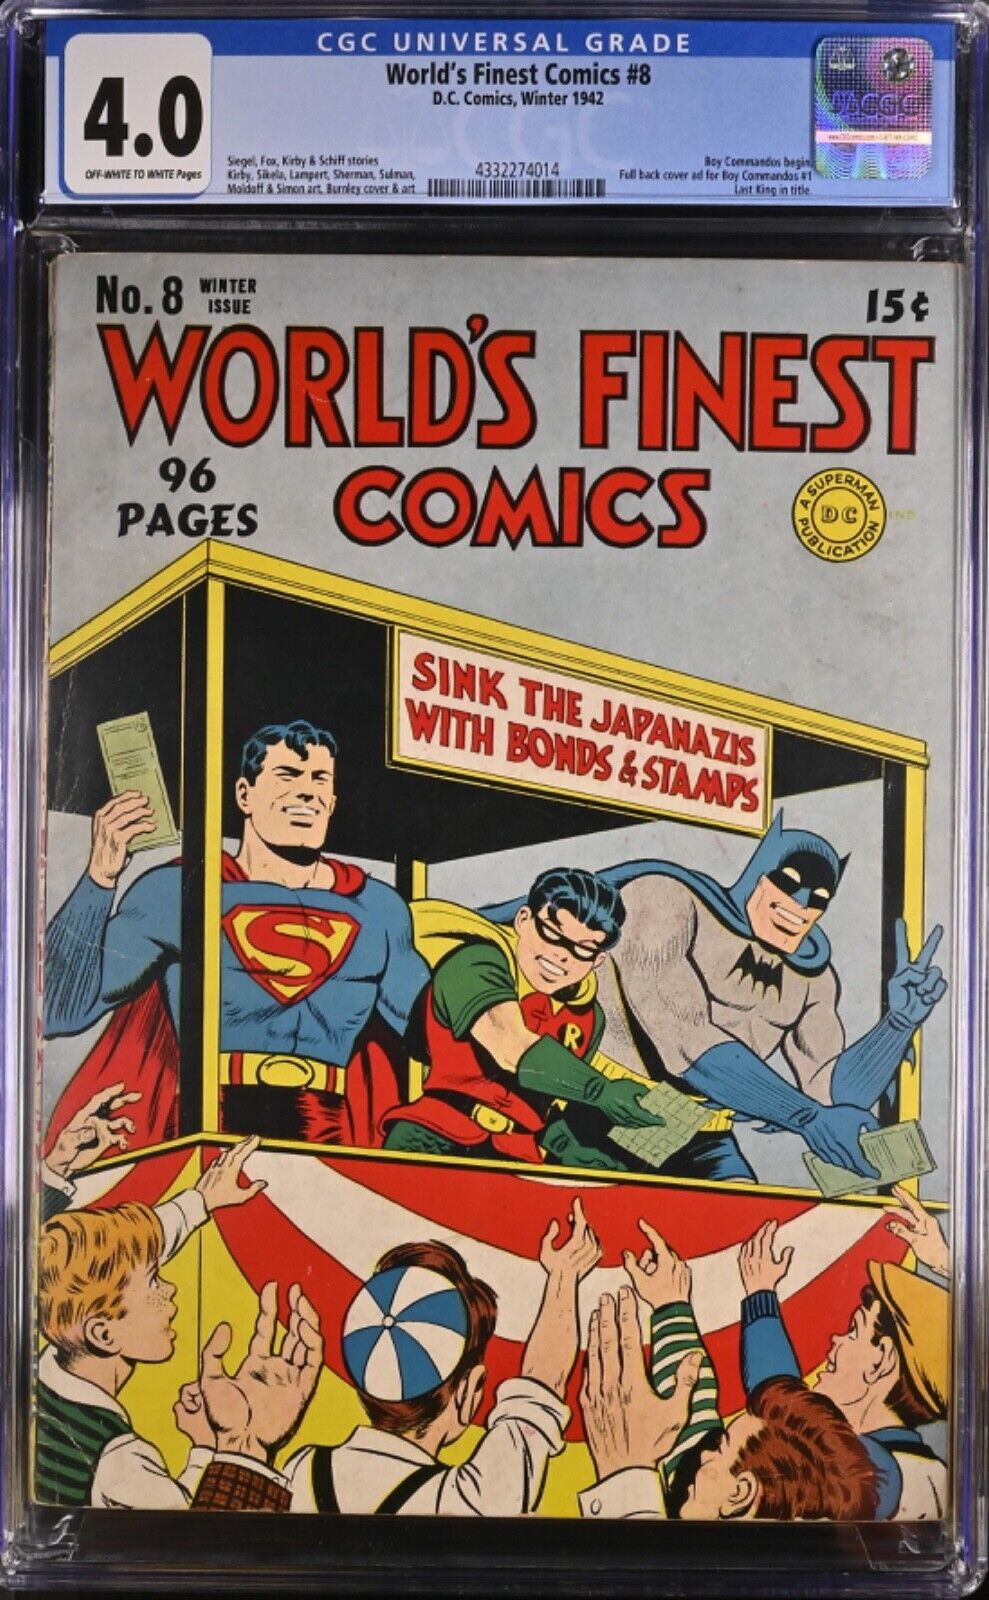 WORLDS FINEST 1941 8 CGC 40CLASSIC 1942 GOLDEN AGE DC COMICS COVER